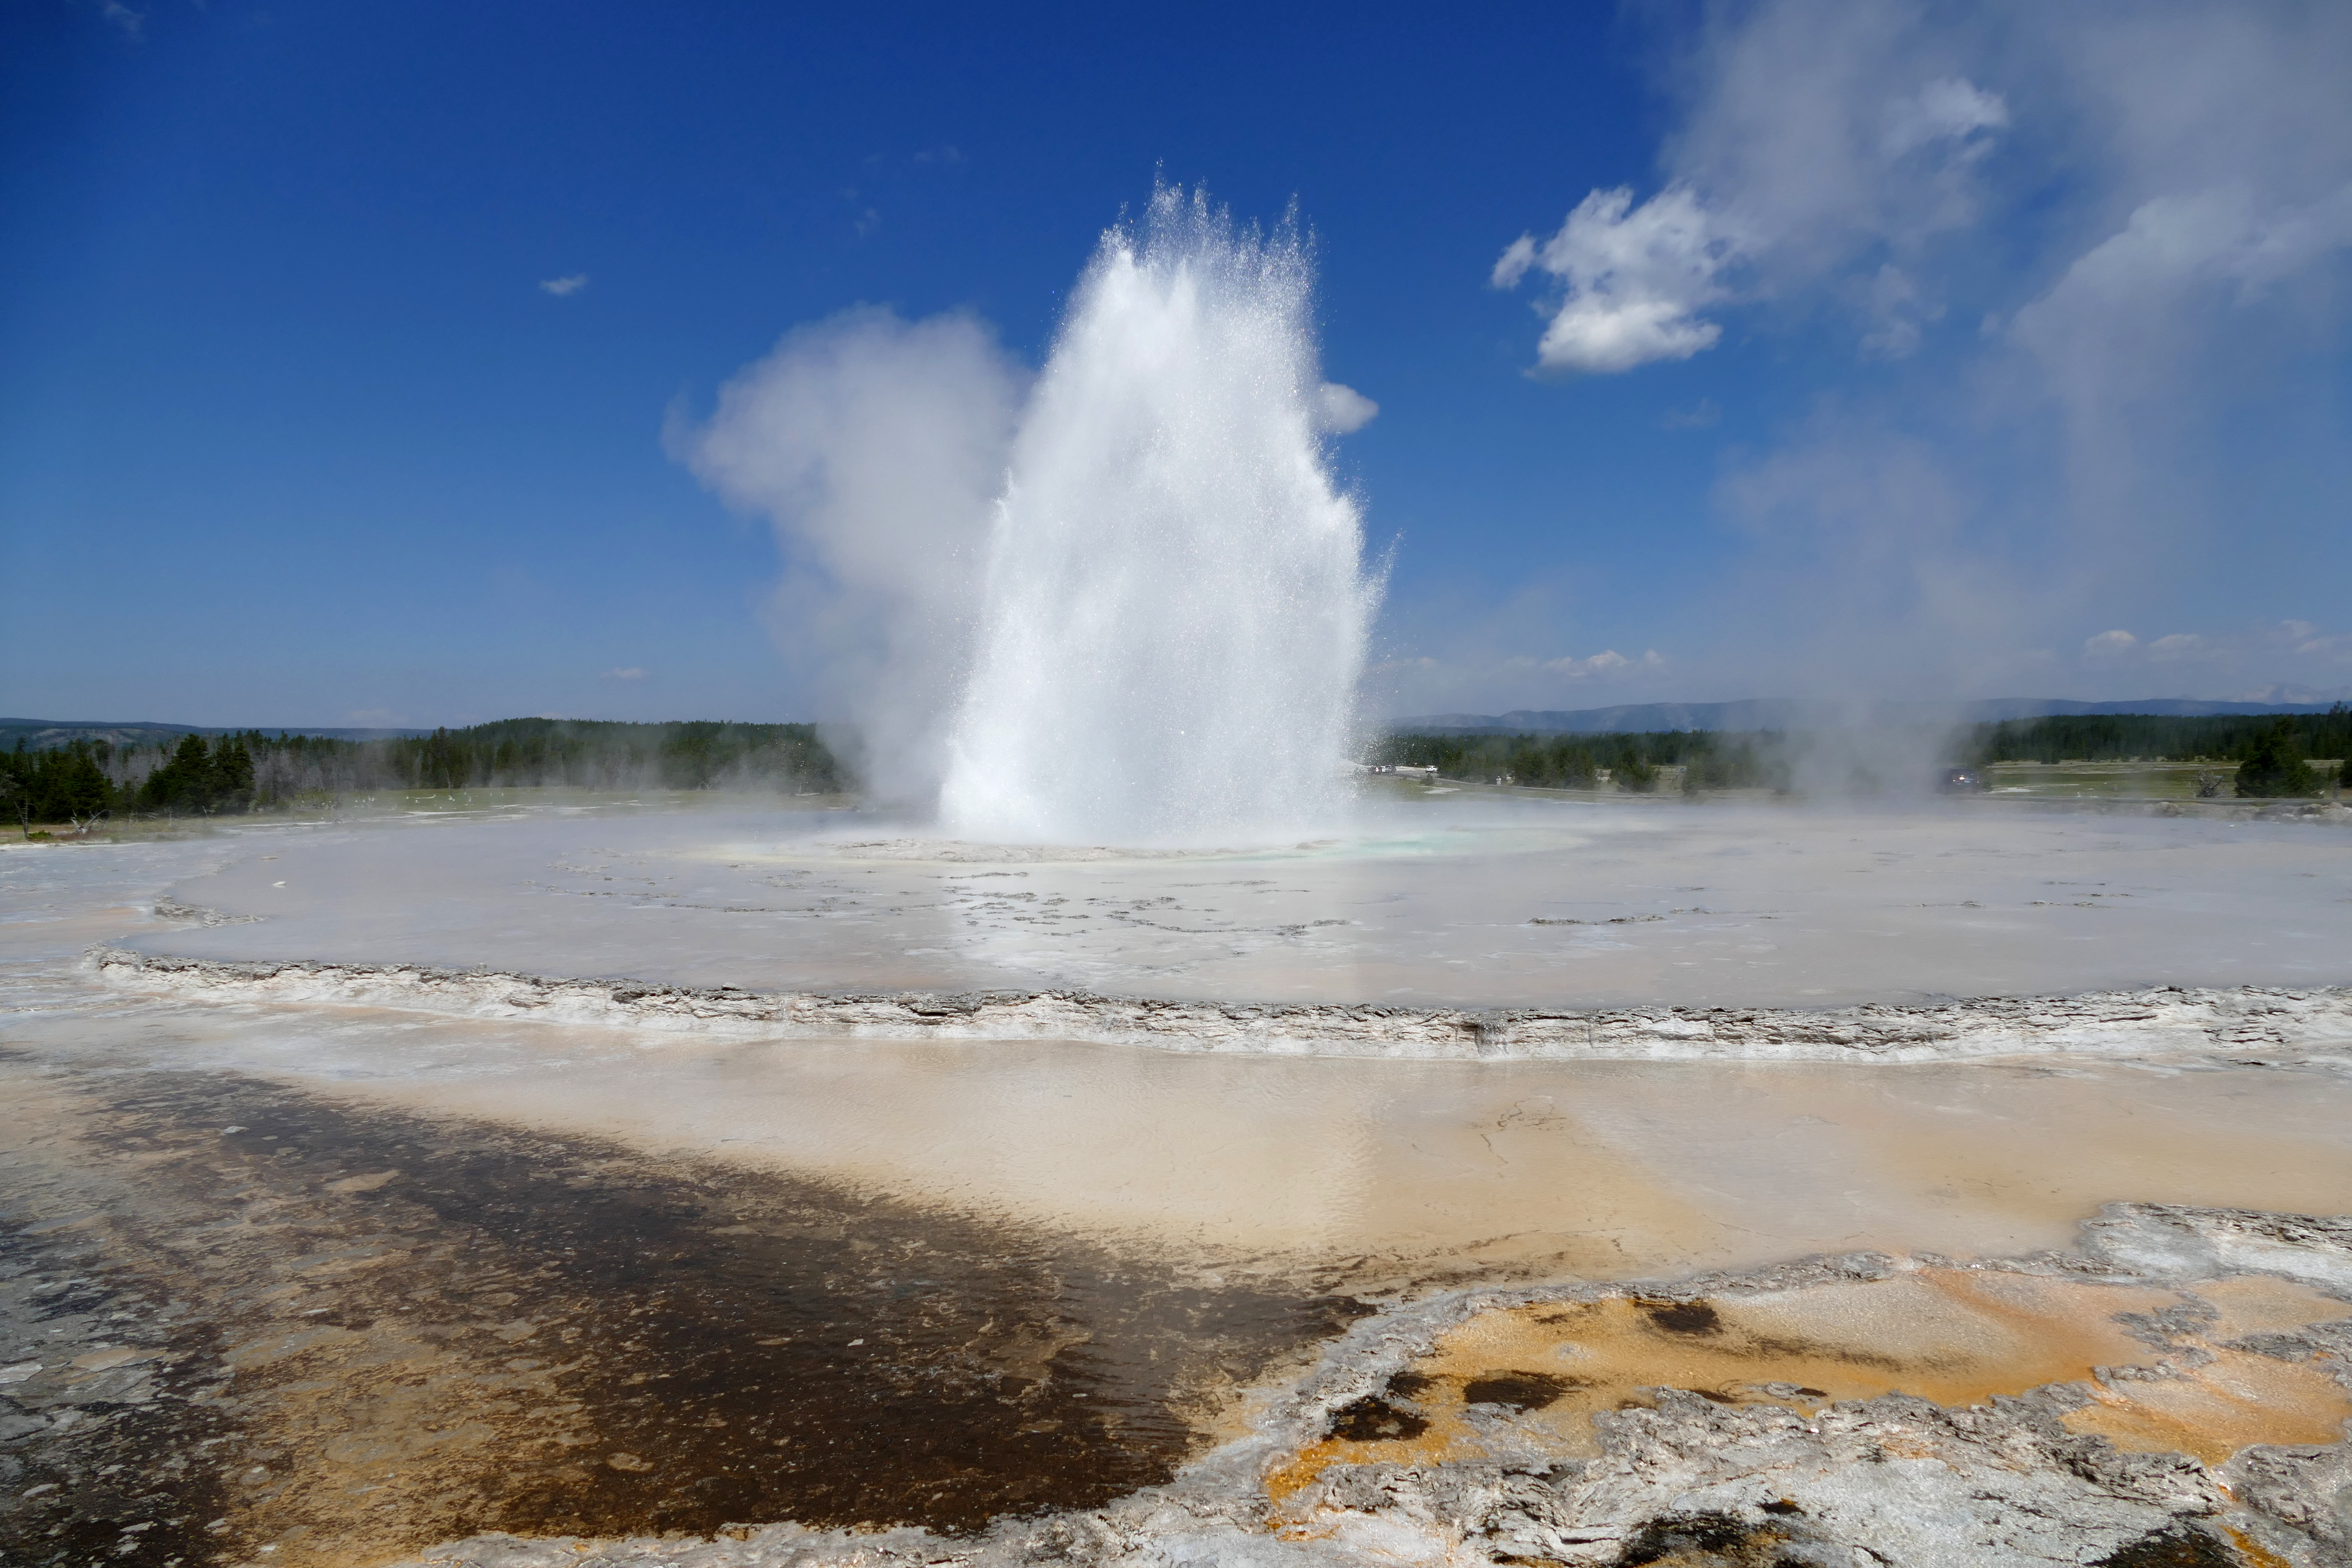 A geyser erupting in the middle of a large pool.